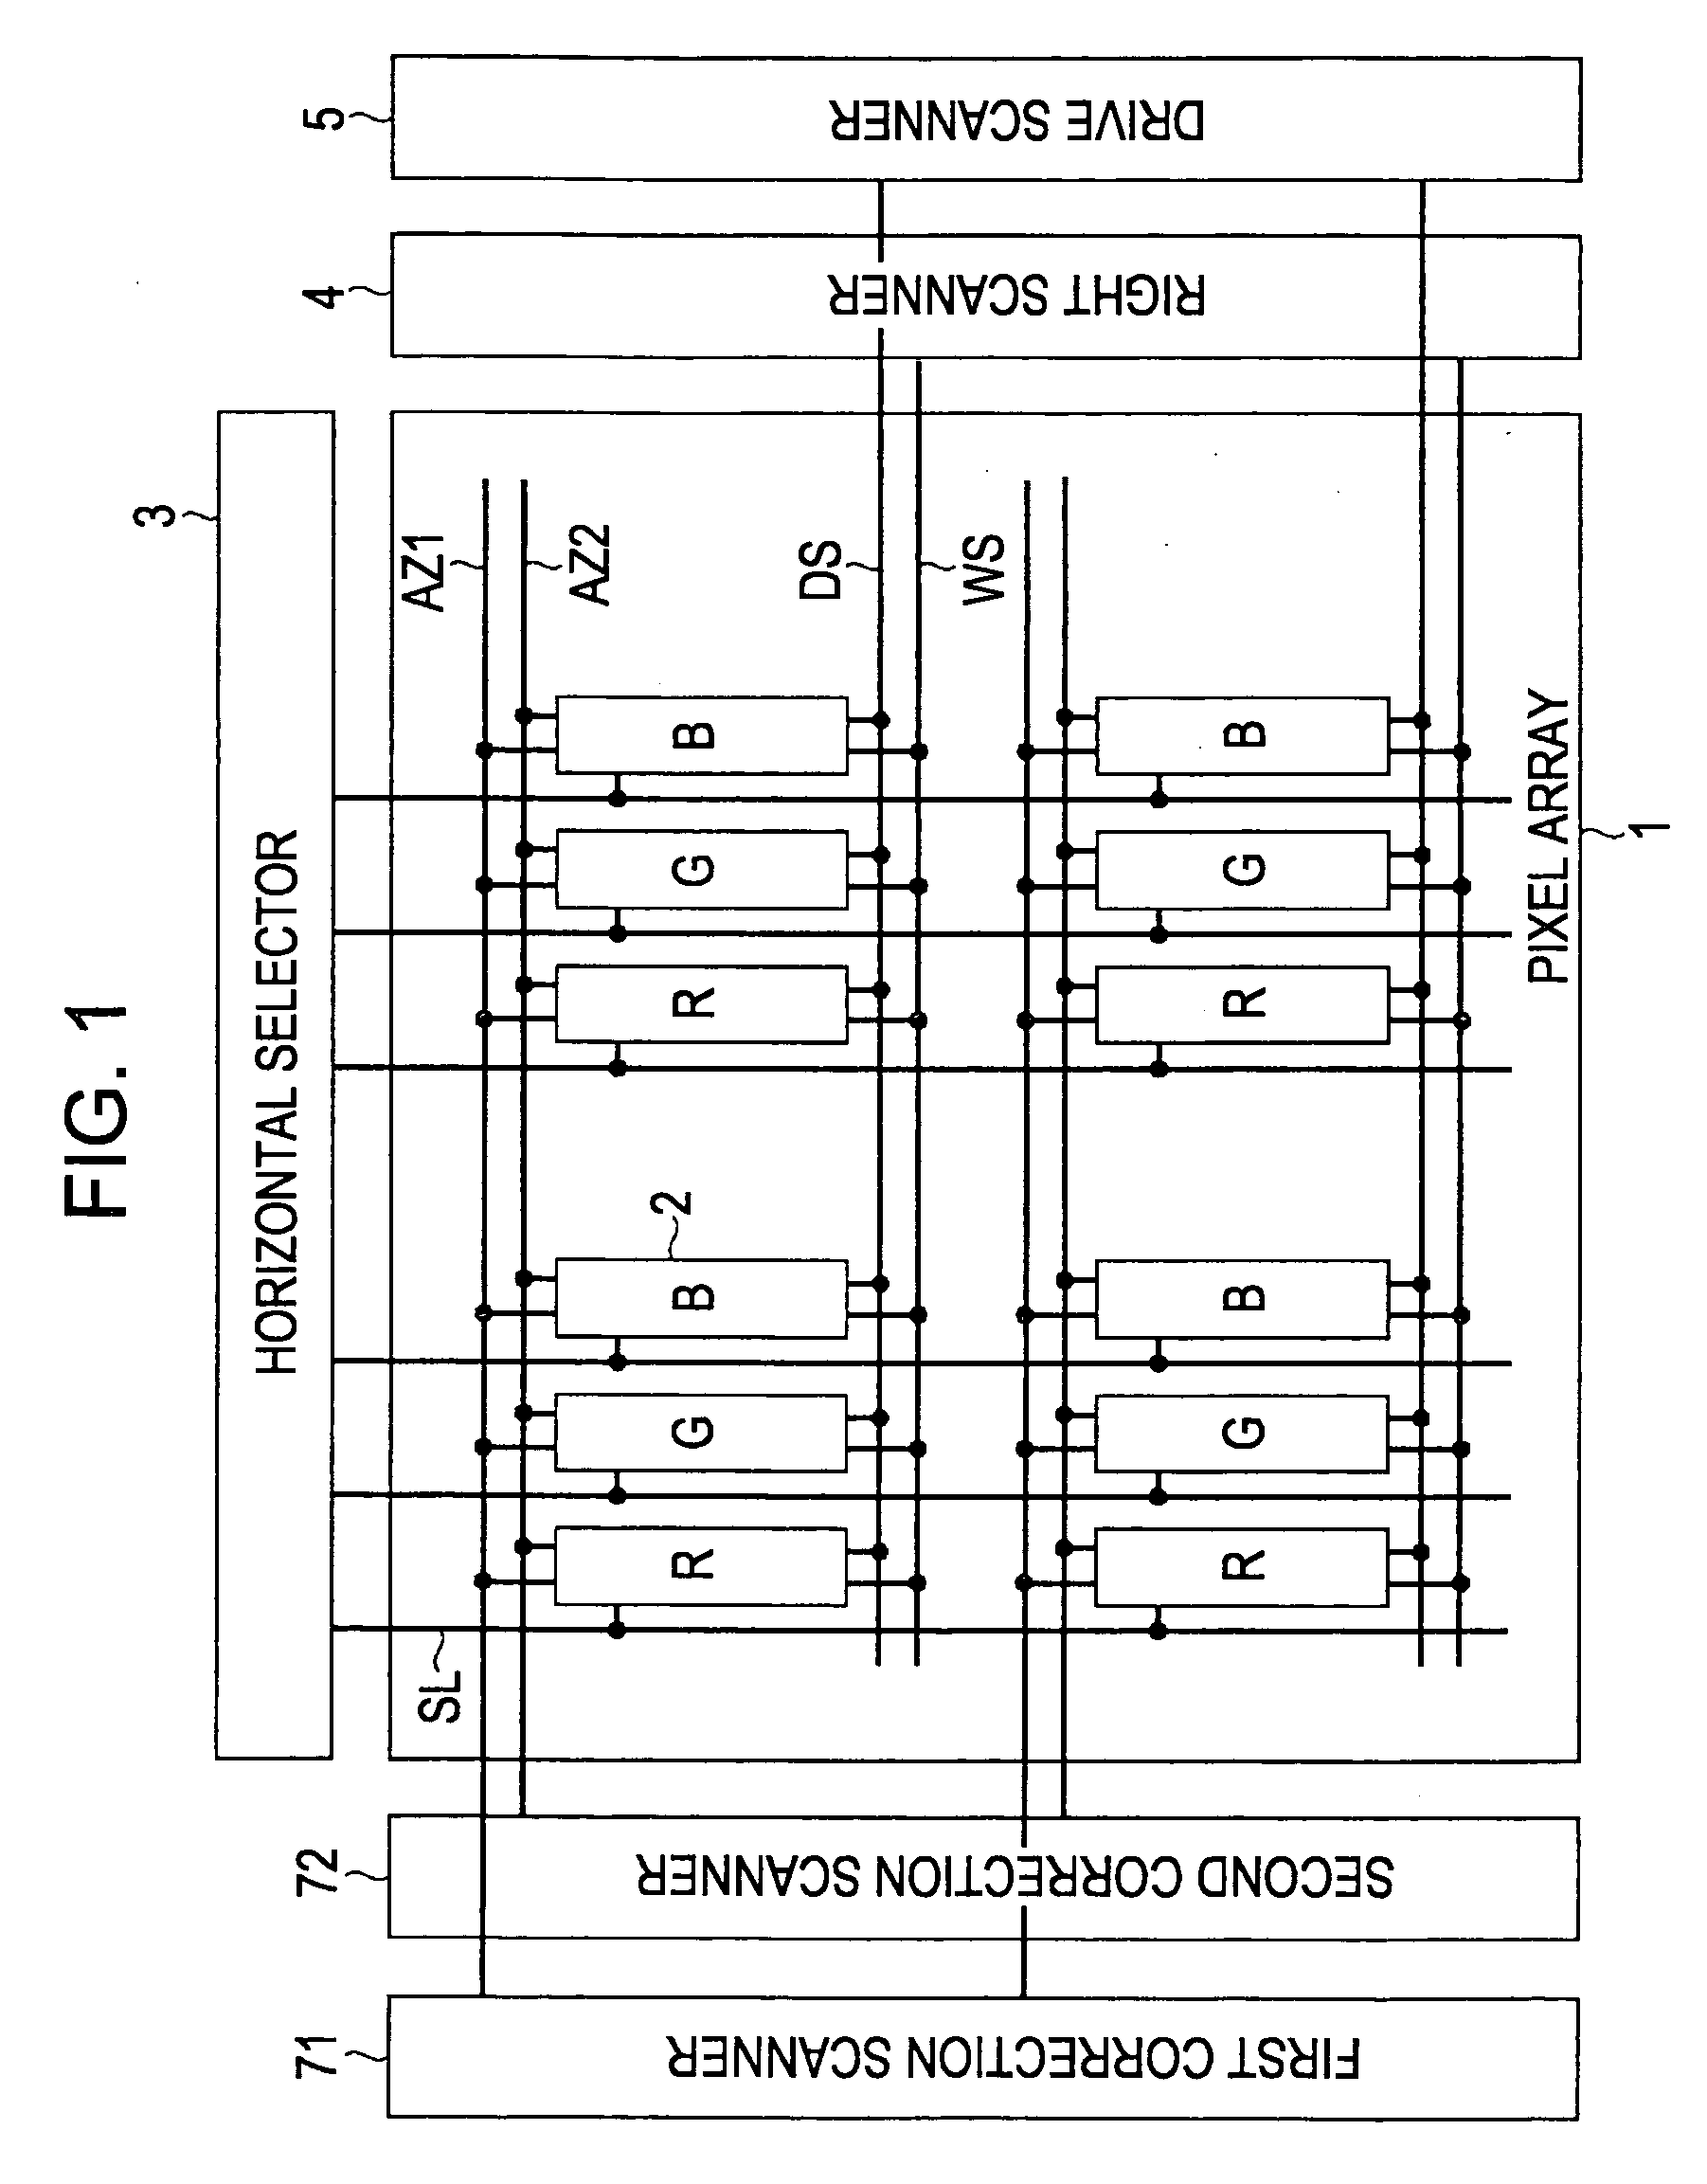 Display apparatus, method of driving a display, and electronic device